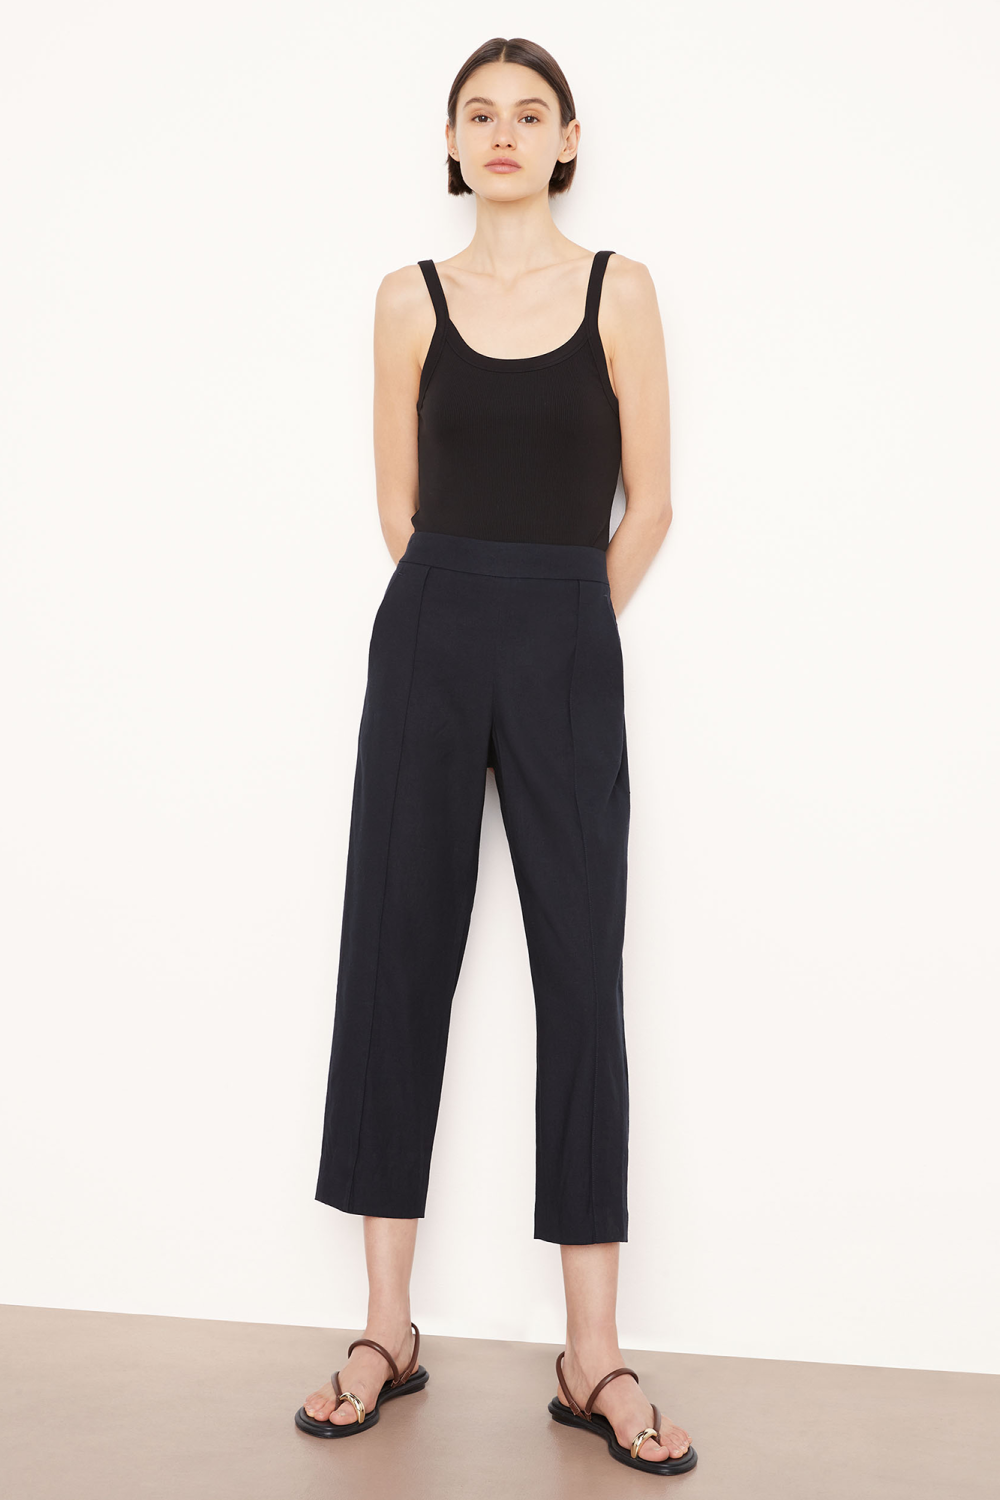 These Tapered Pull On Pants from Vince offer a simple and stylish design that features a refined elastic waist for a comfortable and discreet fit. 